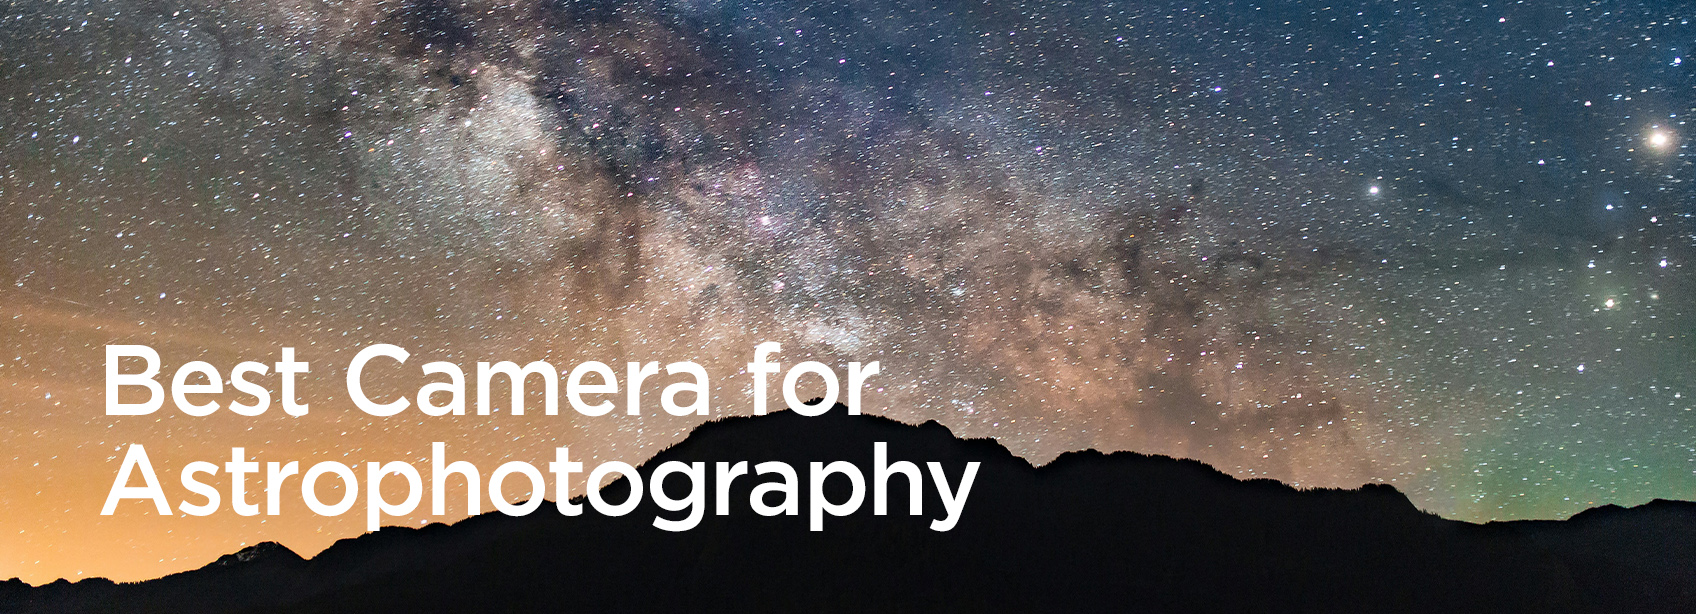 best camera for astrophotography